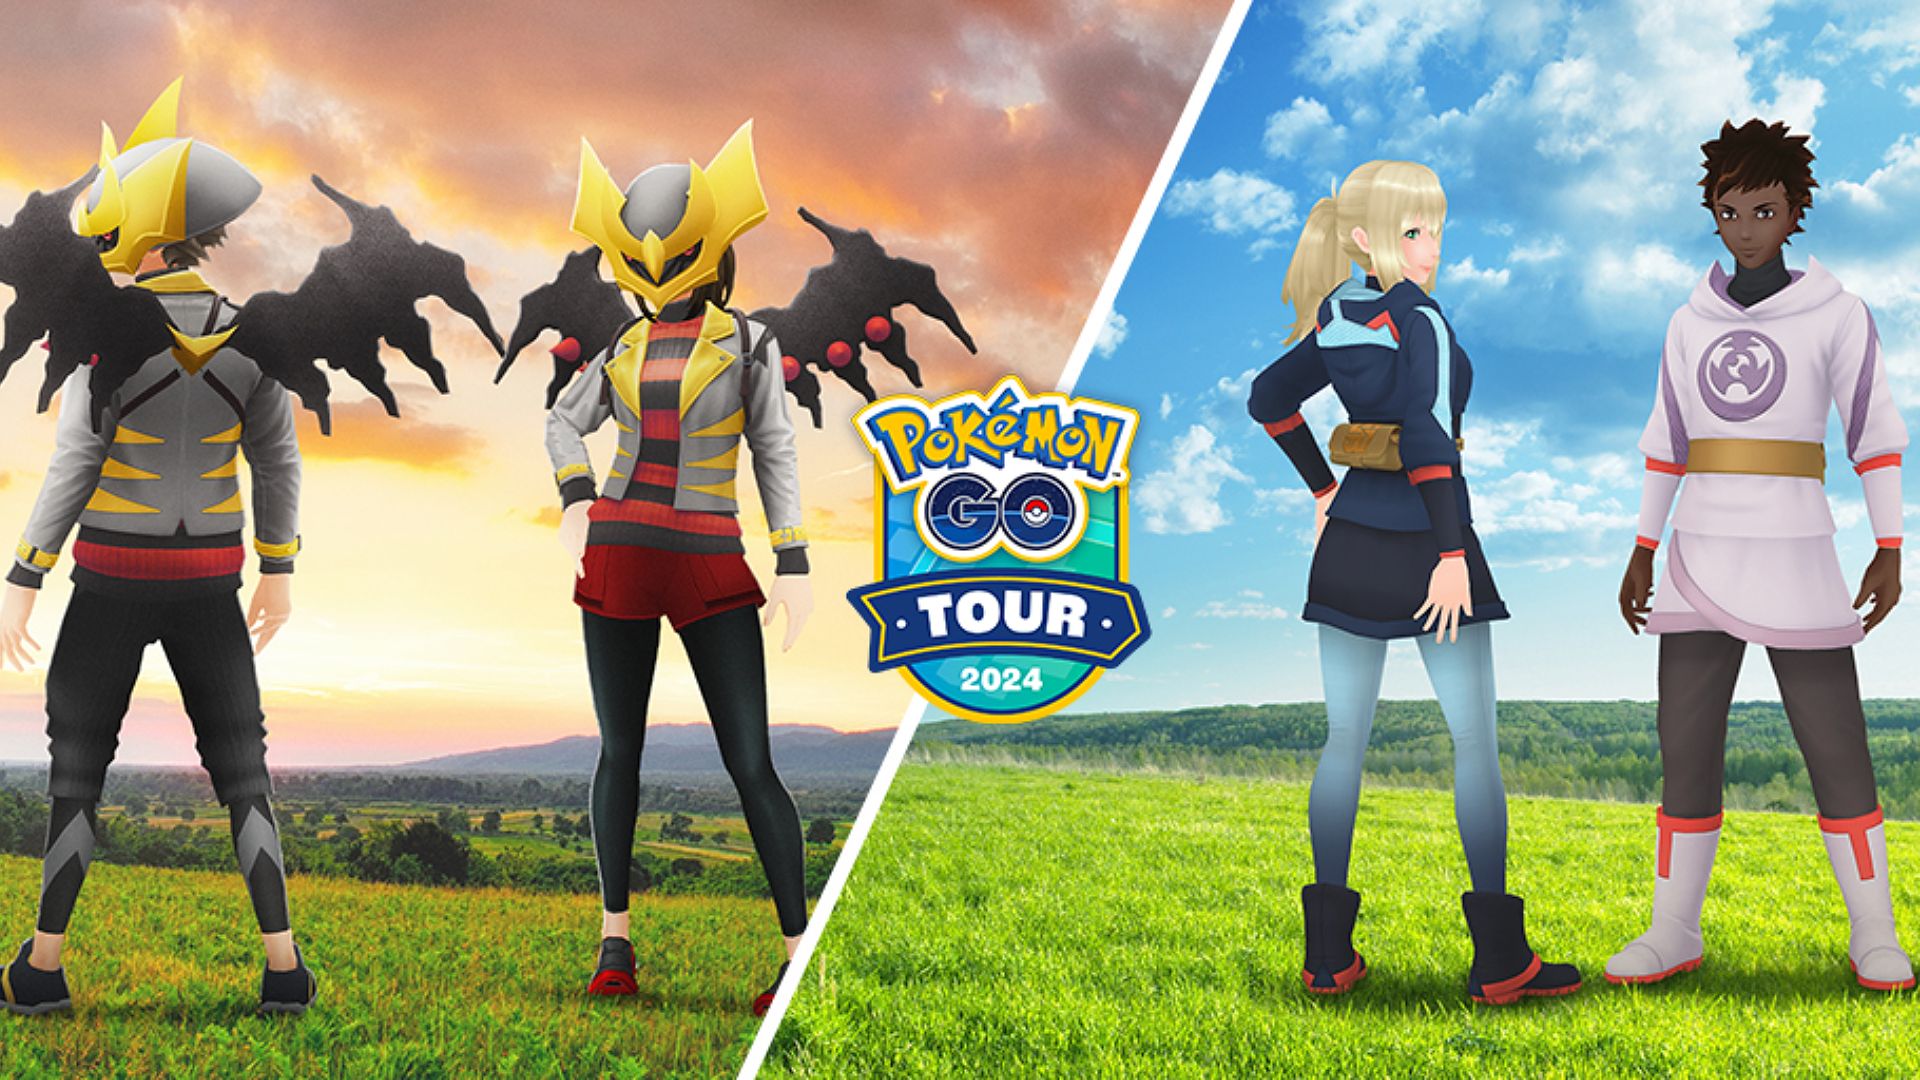 New outfits in the Pokemon Go Tour Sinnoh event